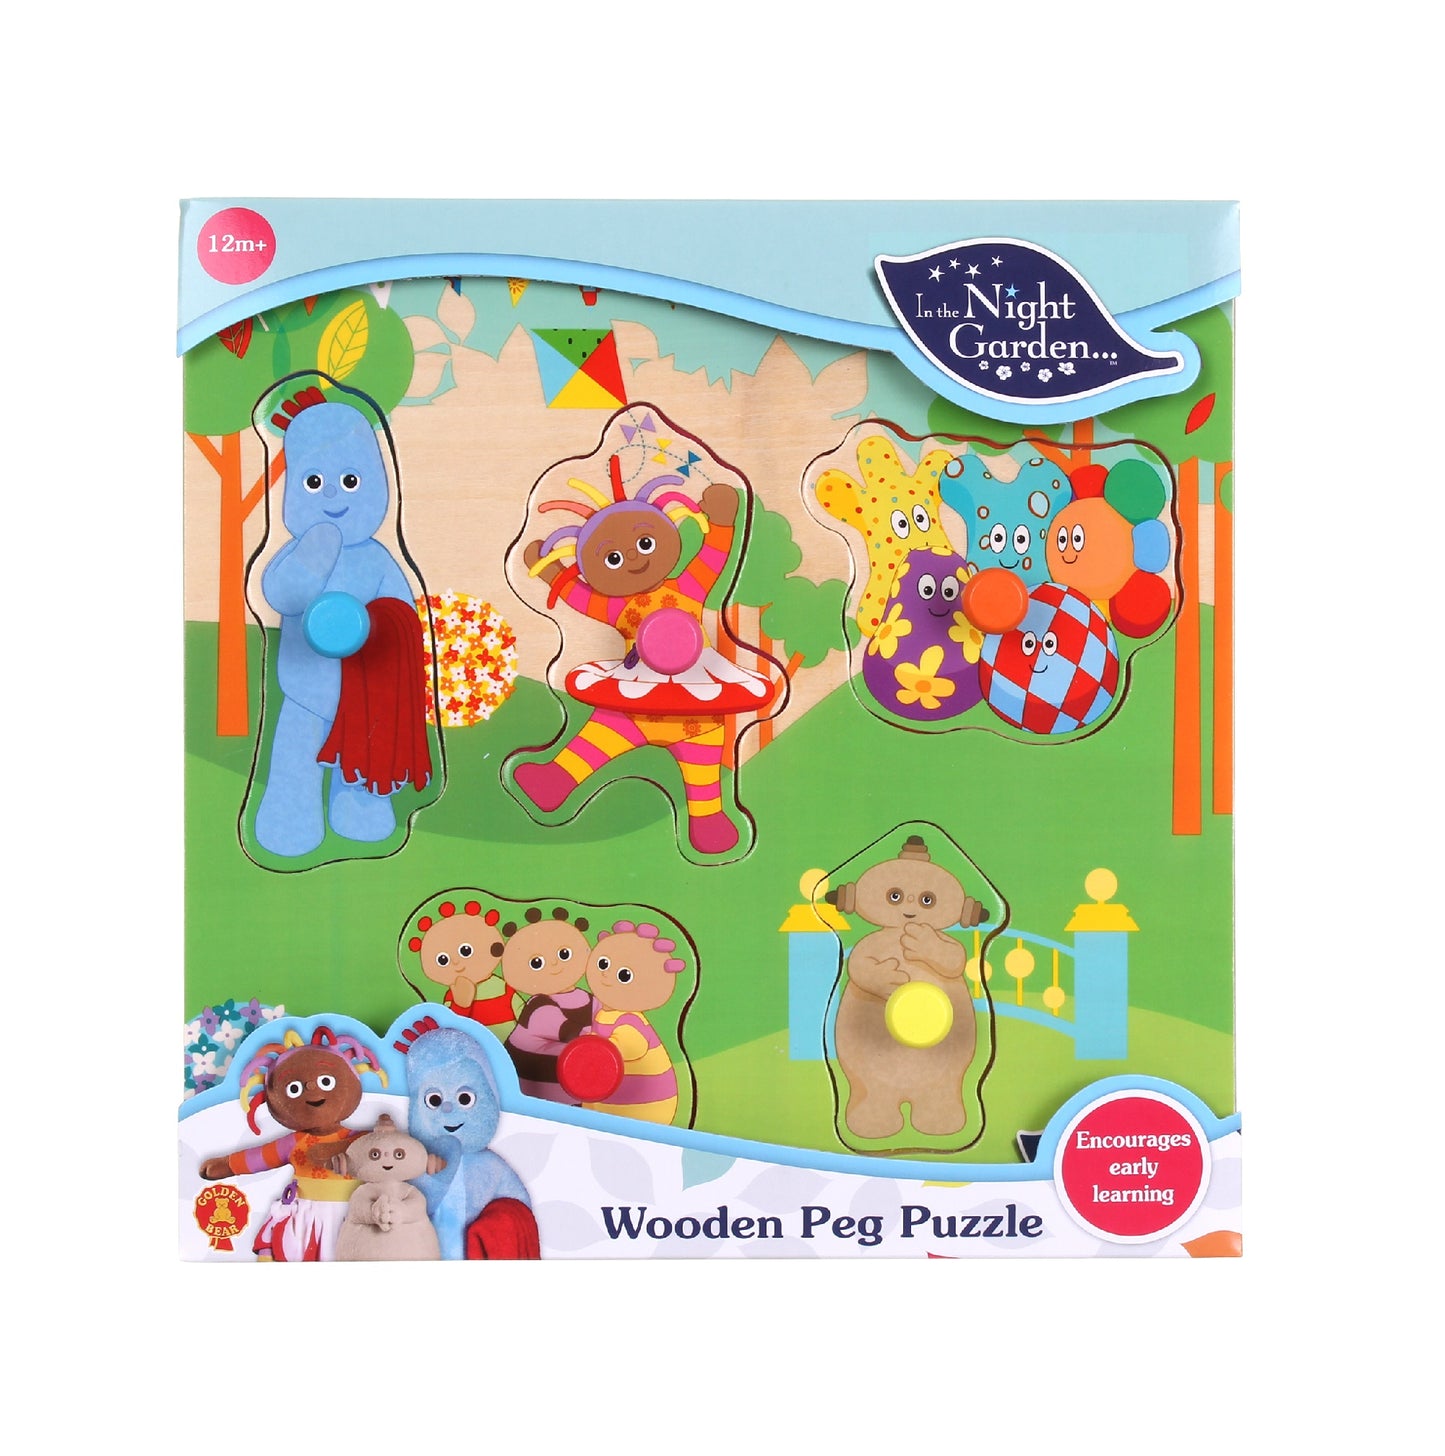 In the Night Garden Wooden Peg Puzzle